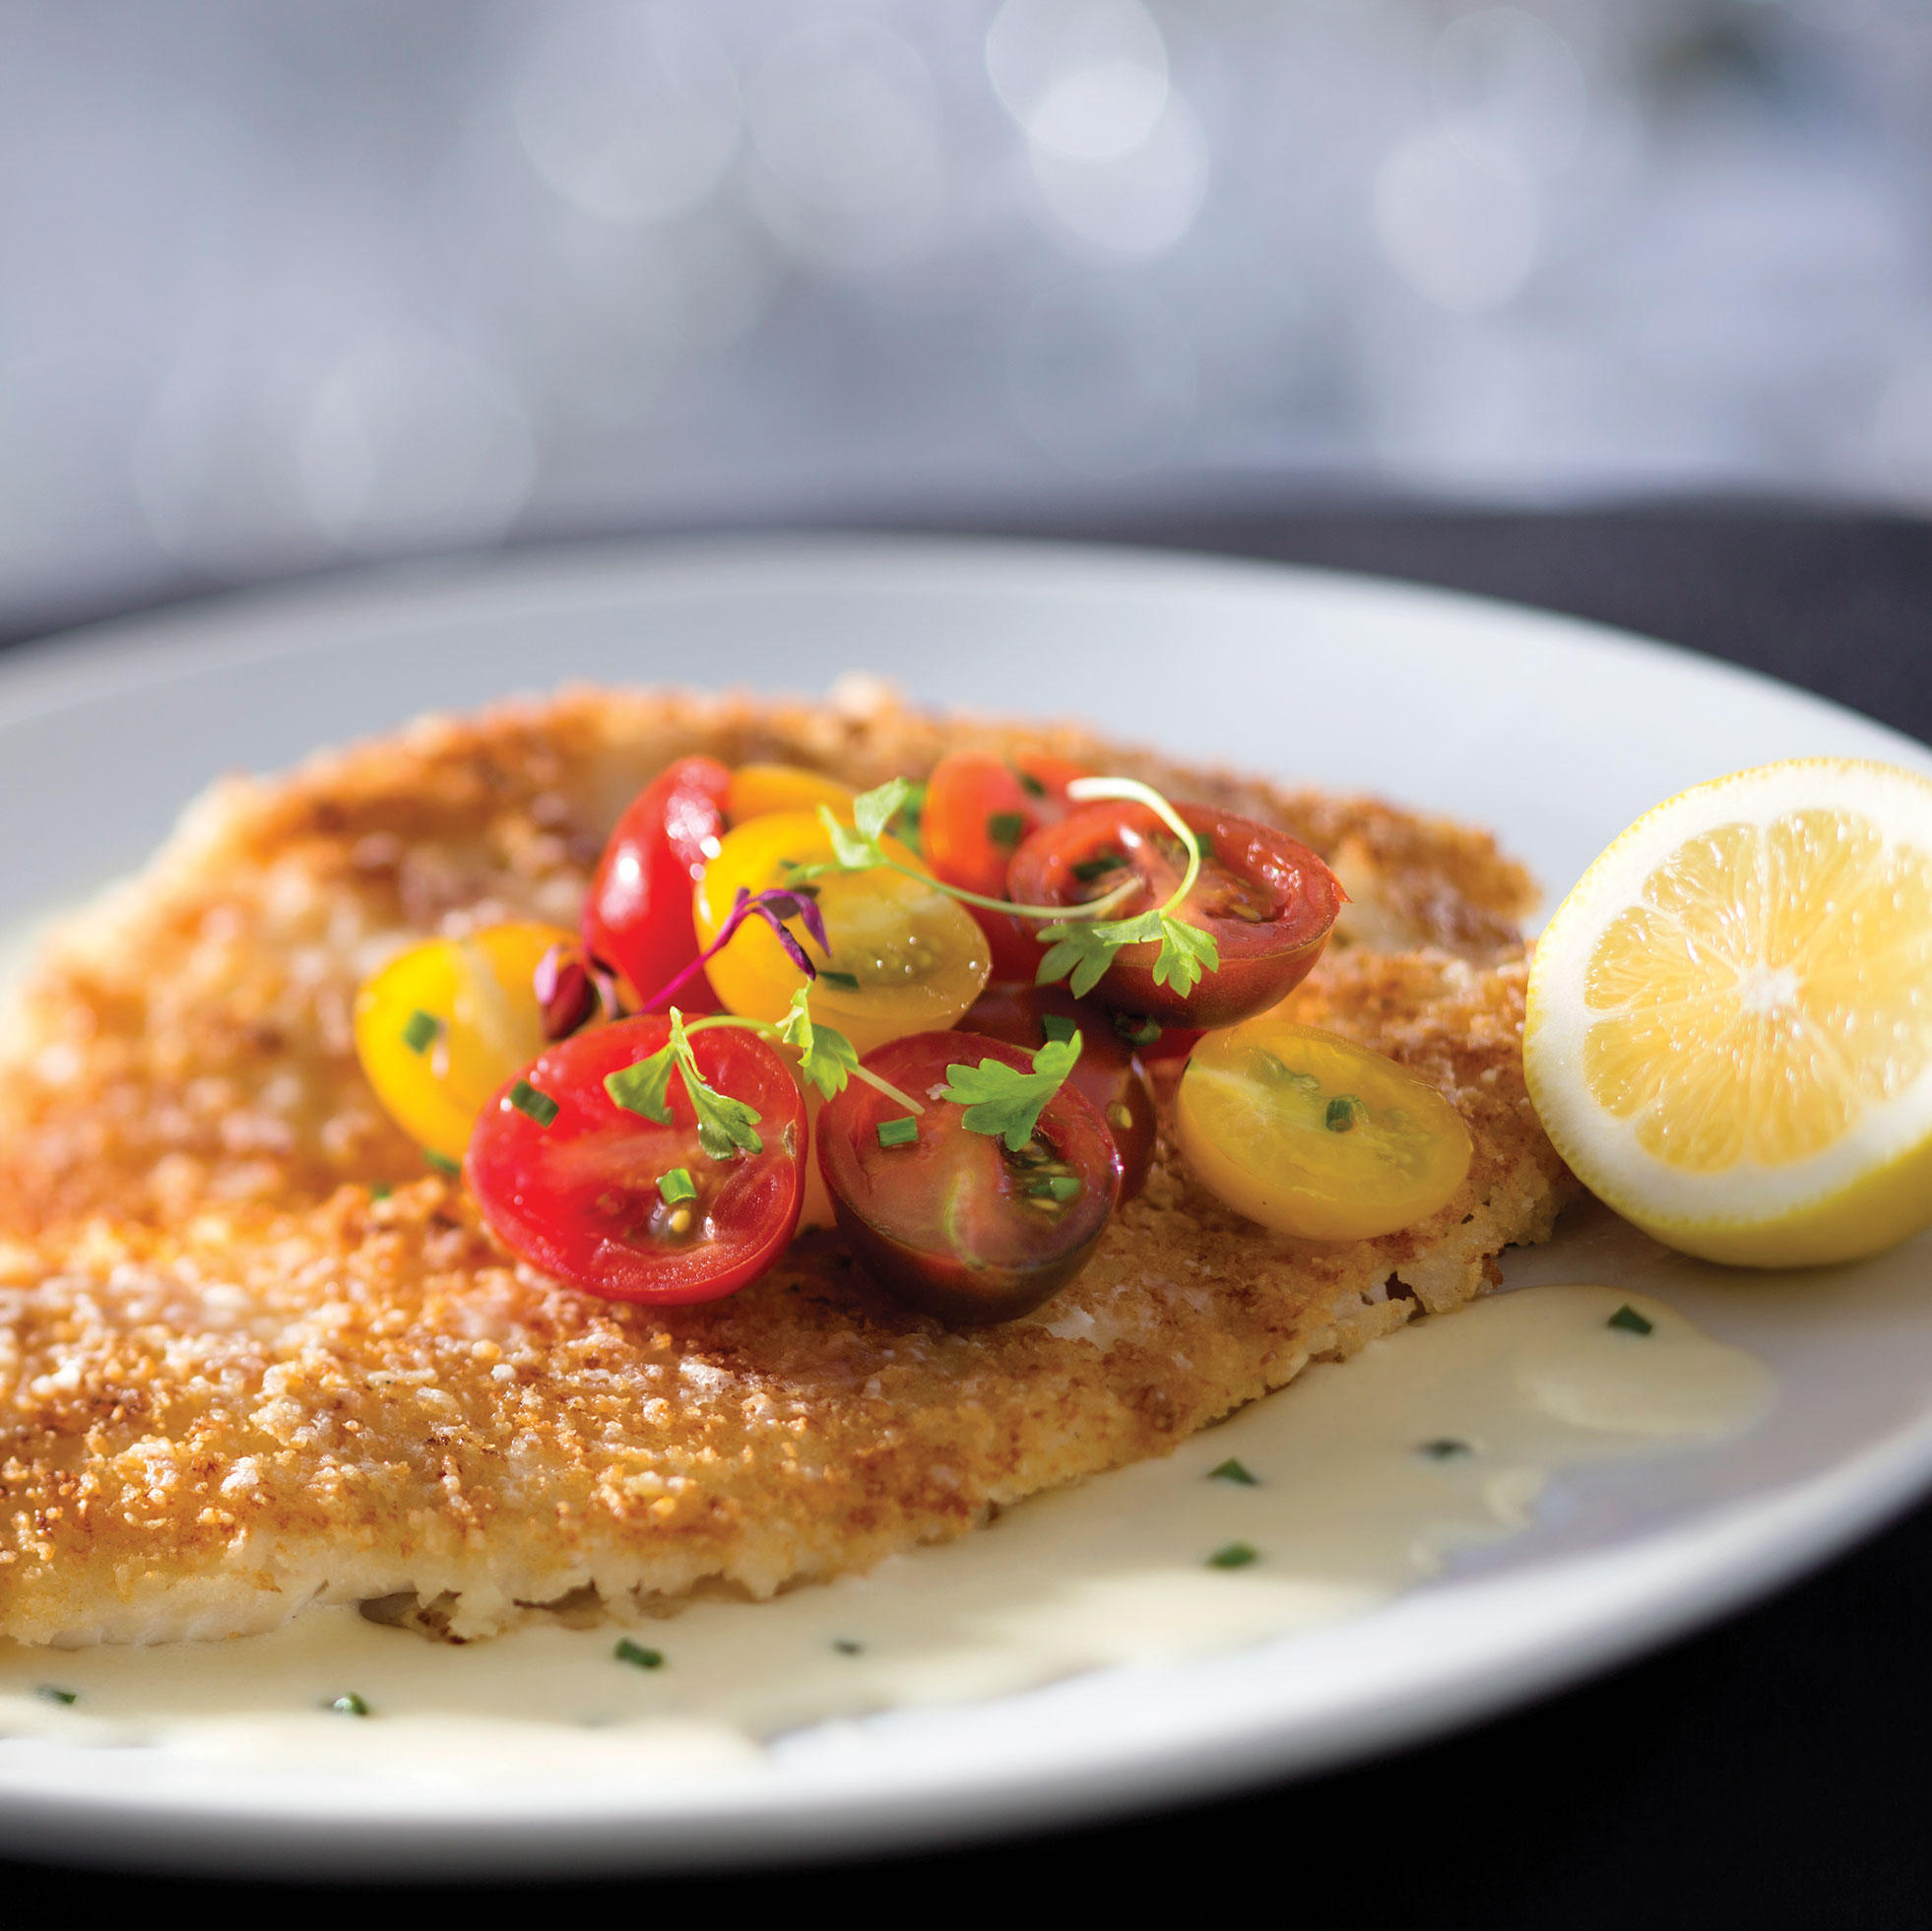 Parmesan Sole served with Heirloom Tomato Salad and a Lemon-Garlic Butter Sauce.